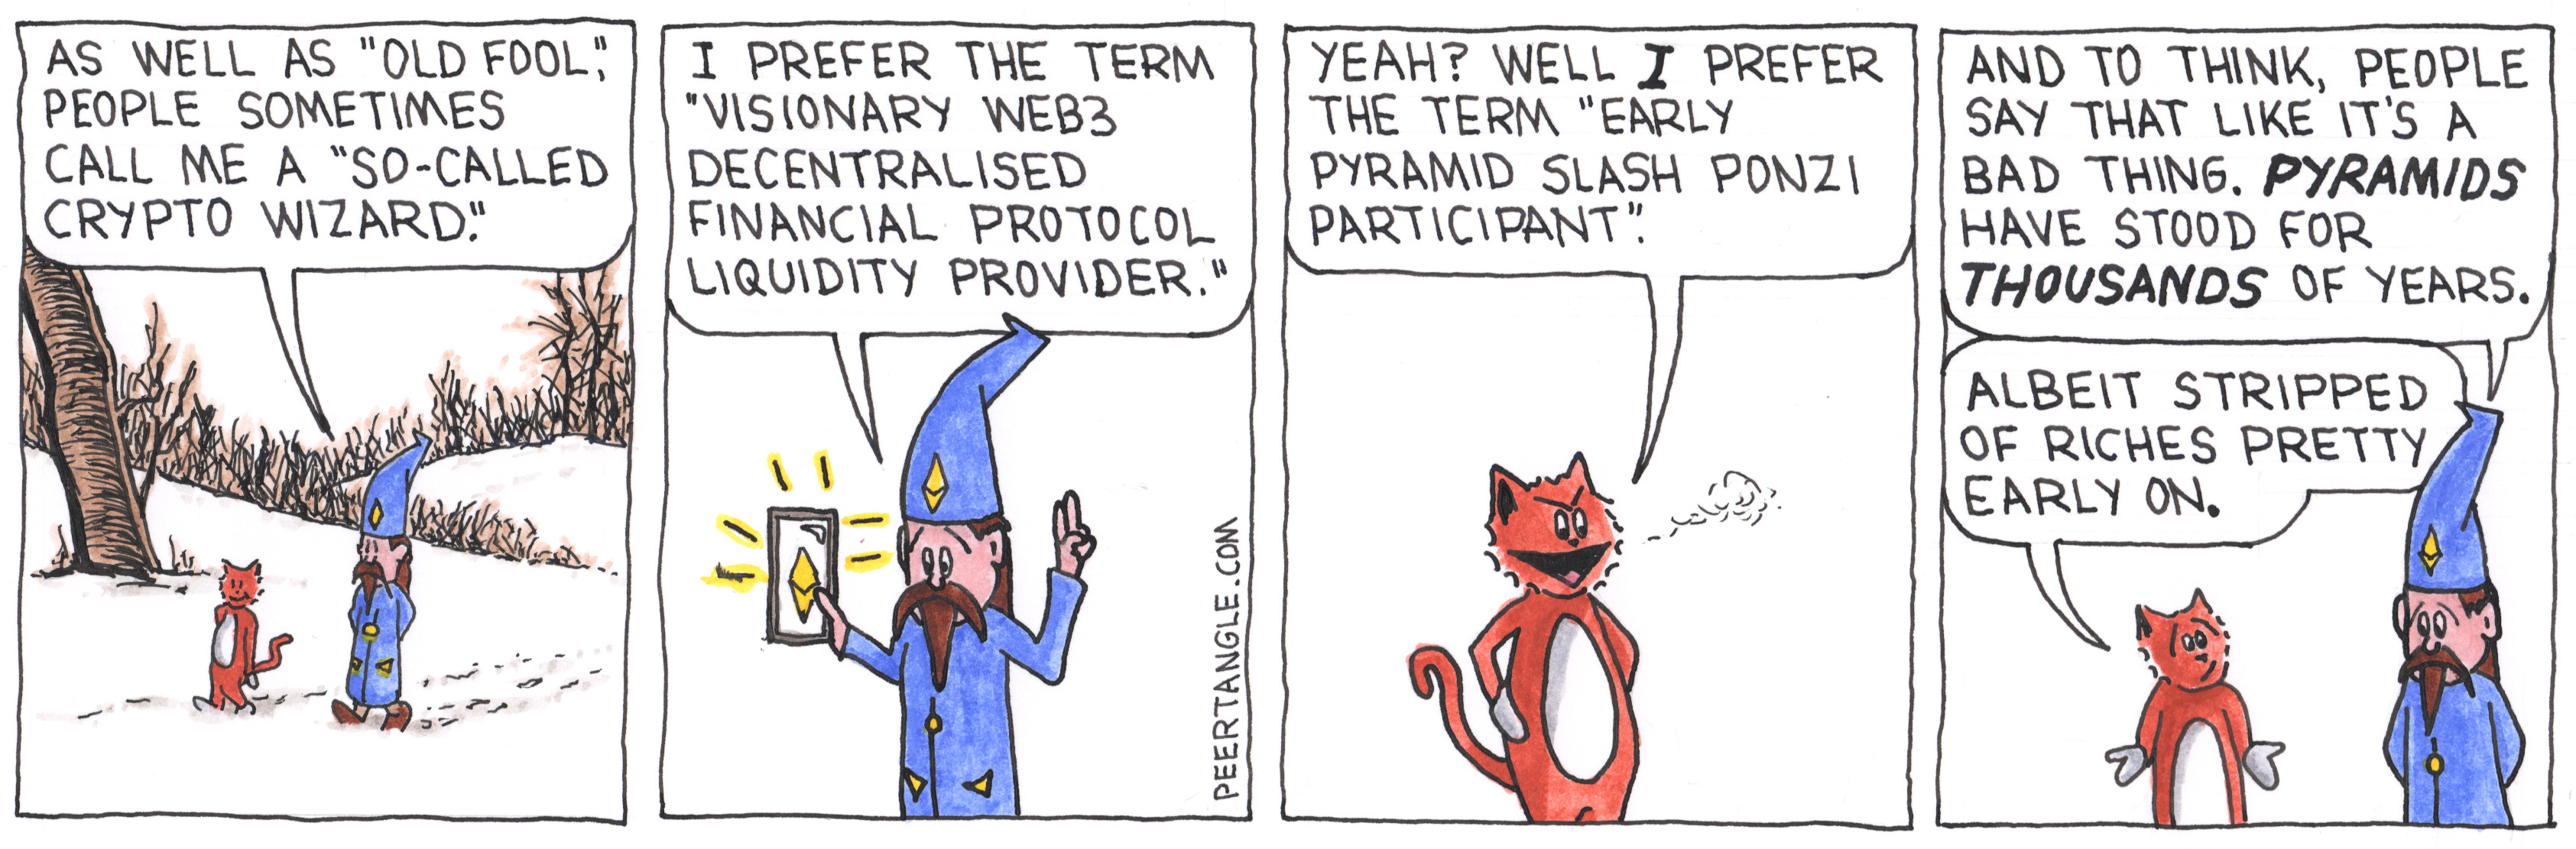 The So-Called Crypto Wizard